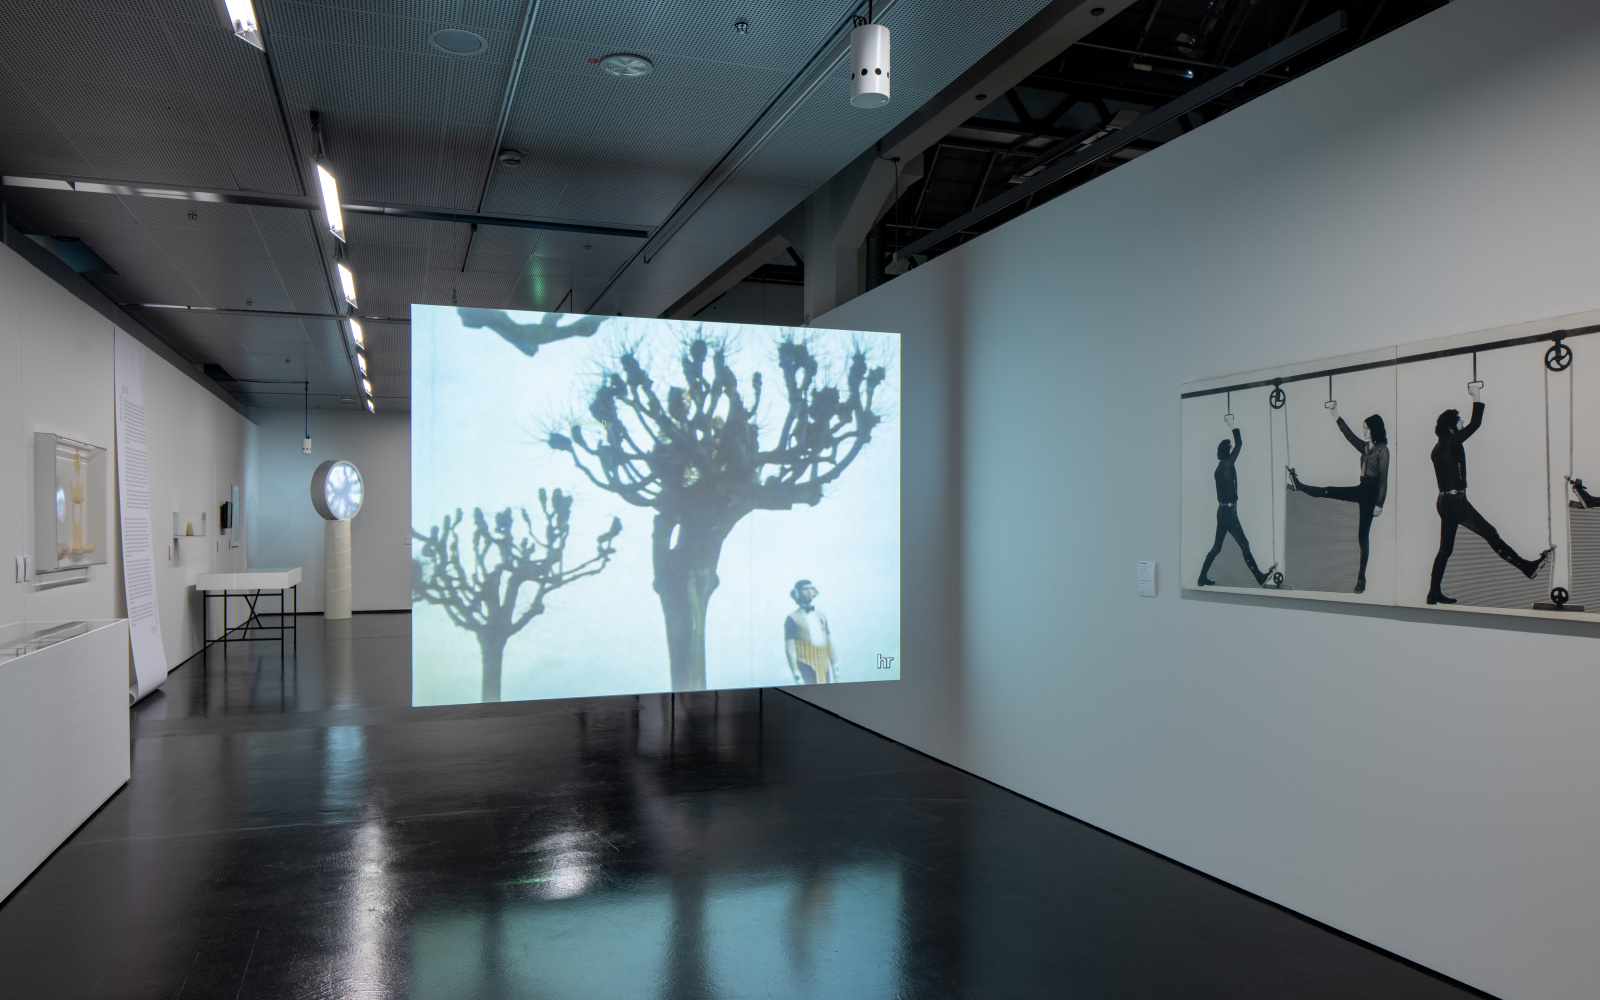 In an exhibition room, a screen can be seen. A tree under which a man is standing is projected onto it.